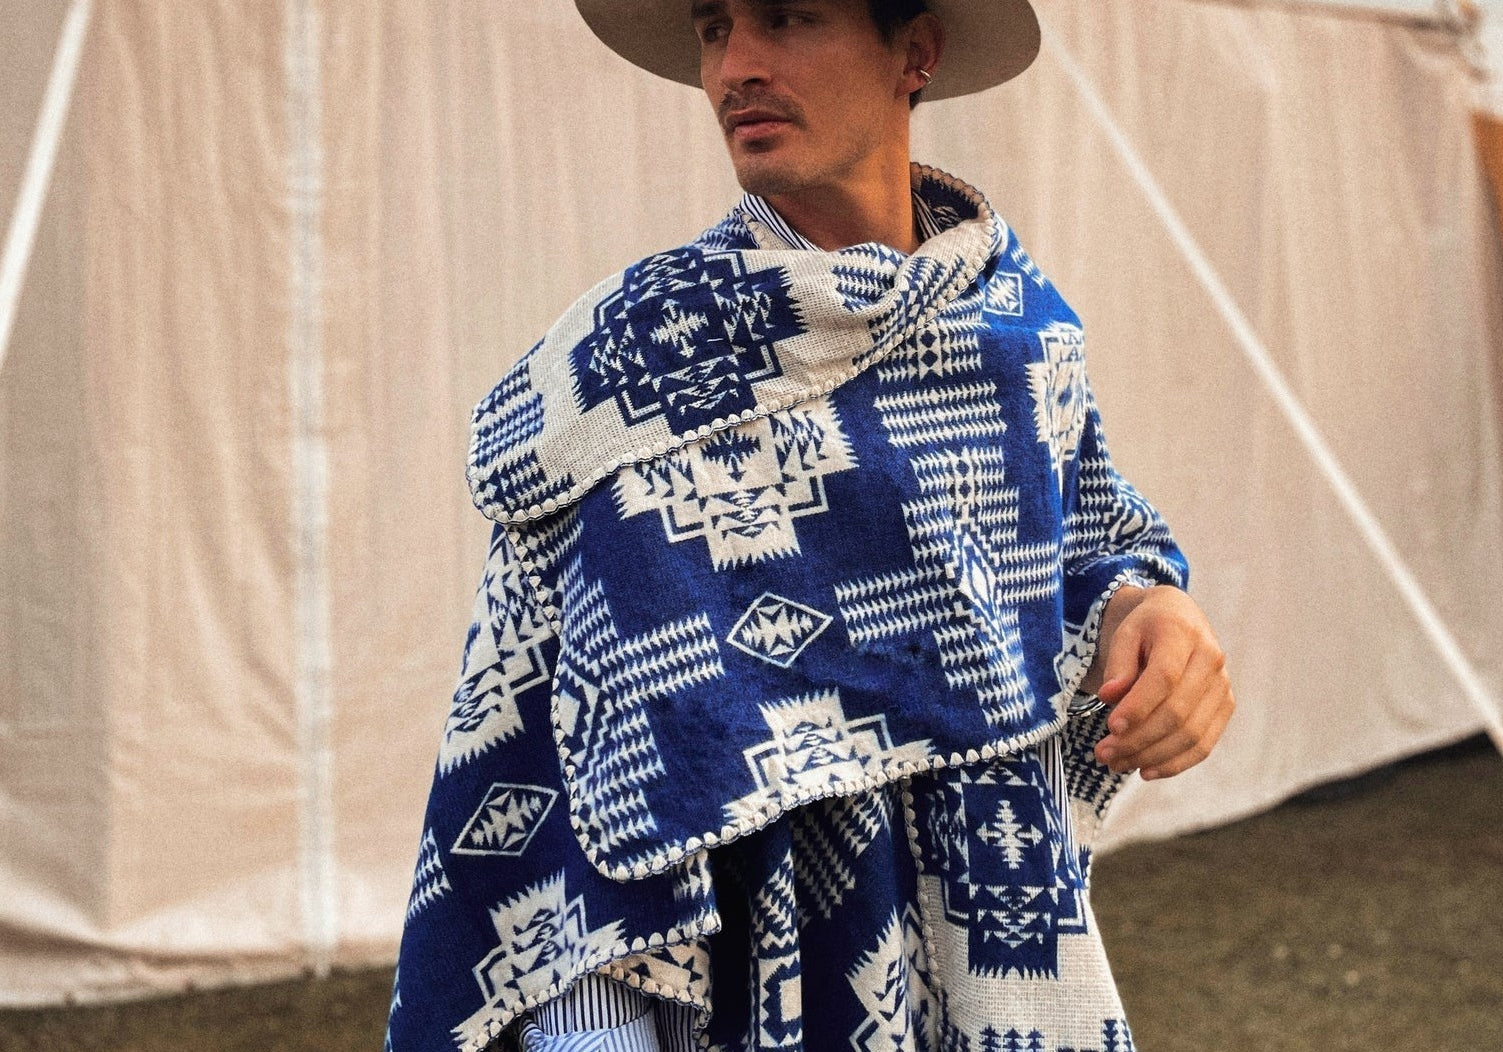 Man wearing the blue sierra poncho. Poncho features a geometric design with tones darker on one side. He is standing outside in front of a tent.